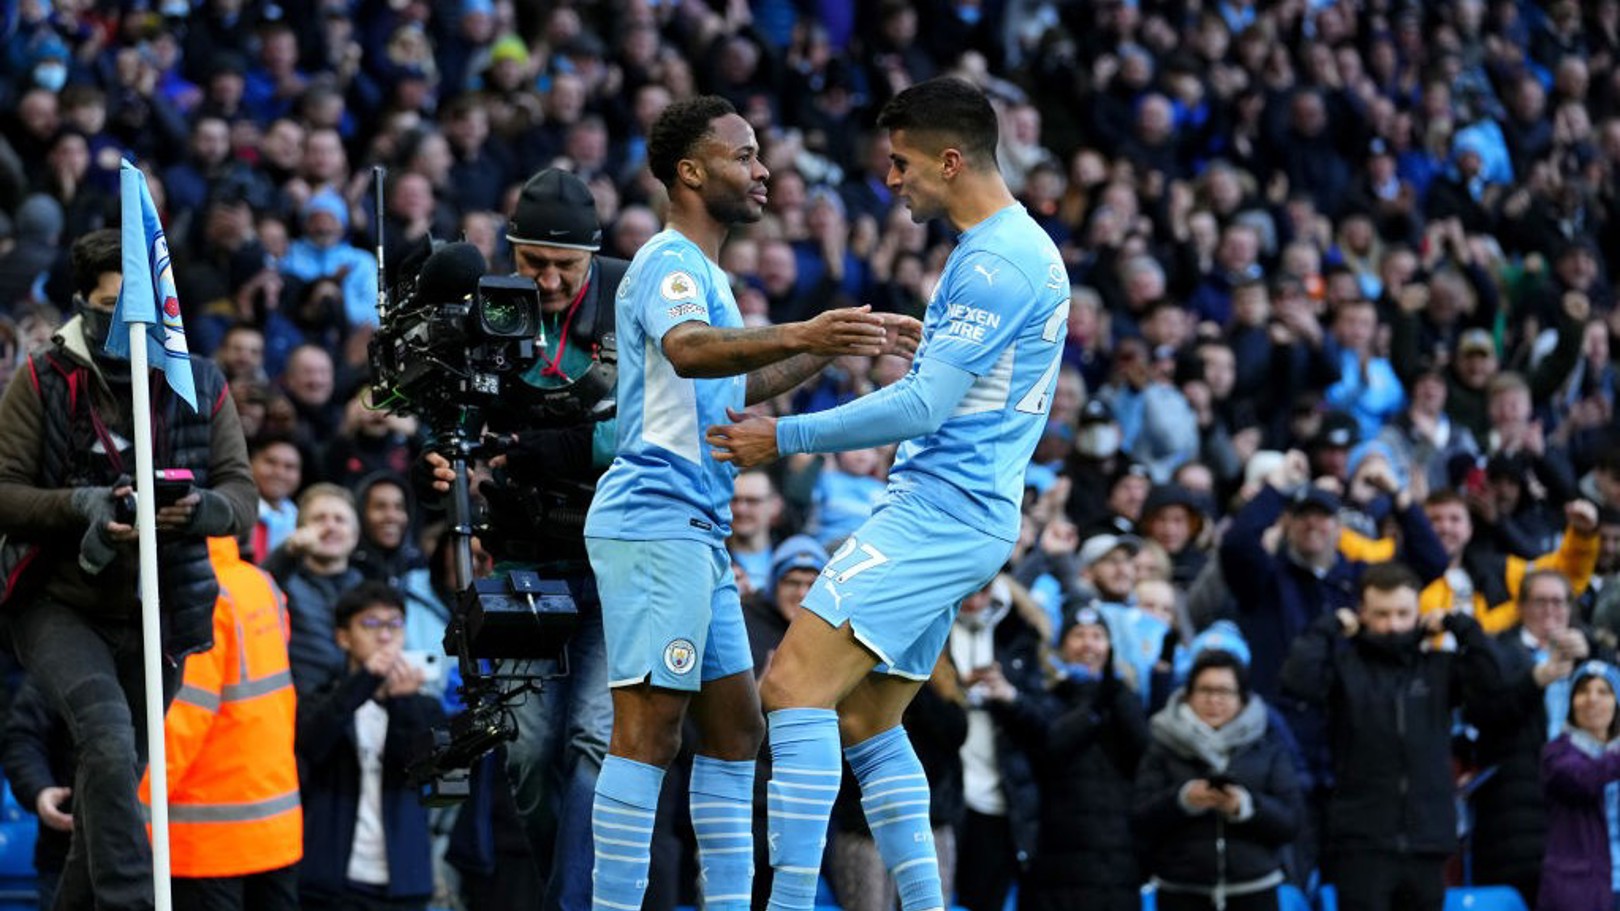 City duo shortlisted for Premier League Player of the Month